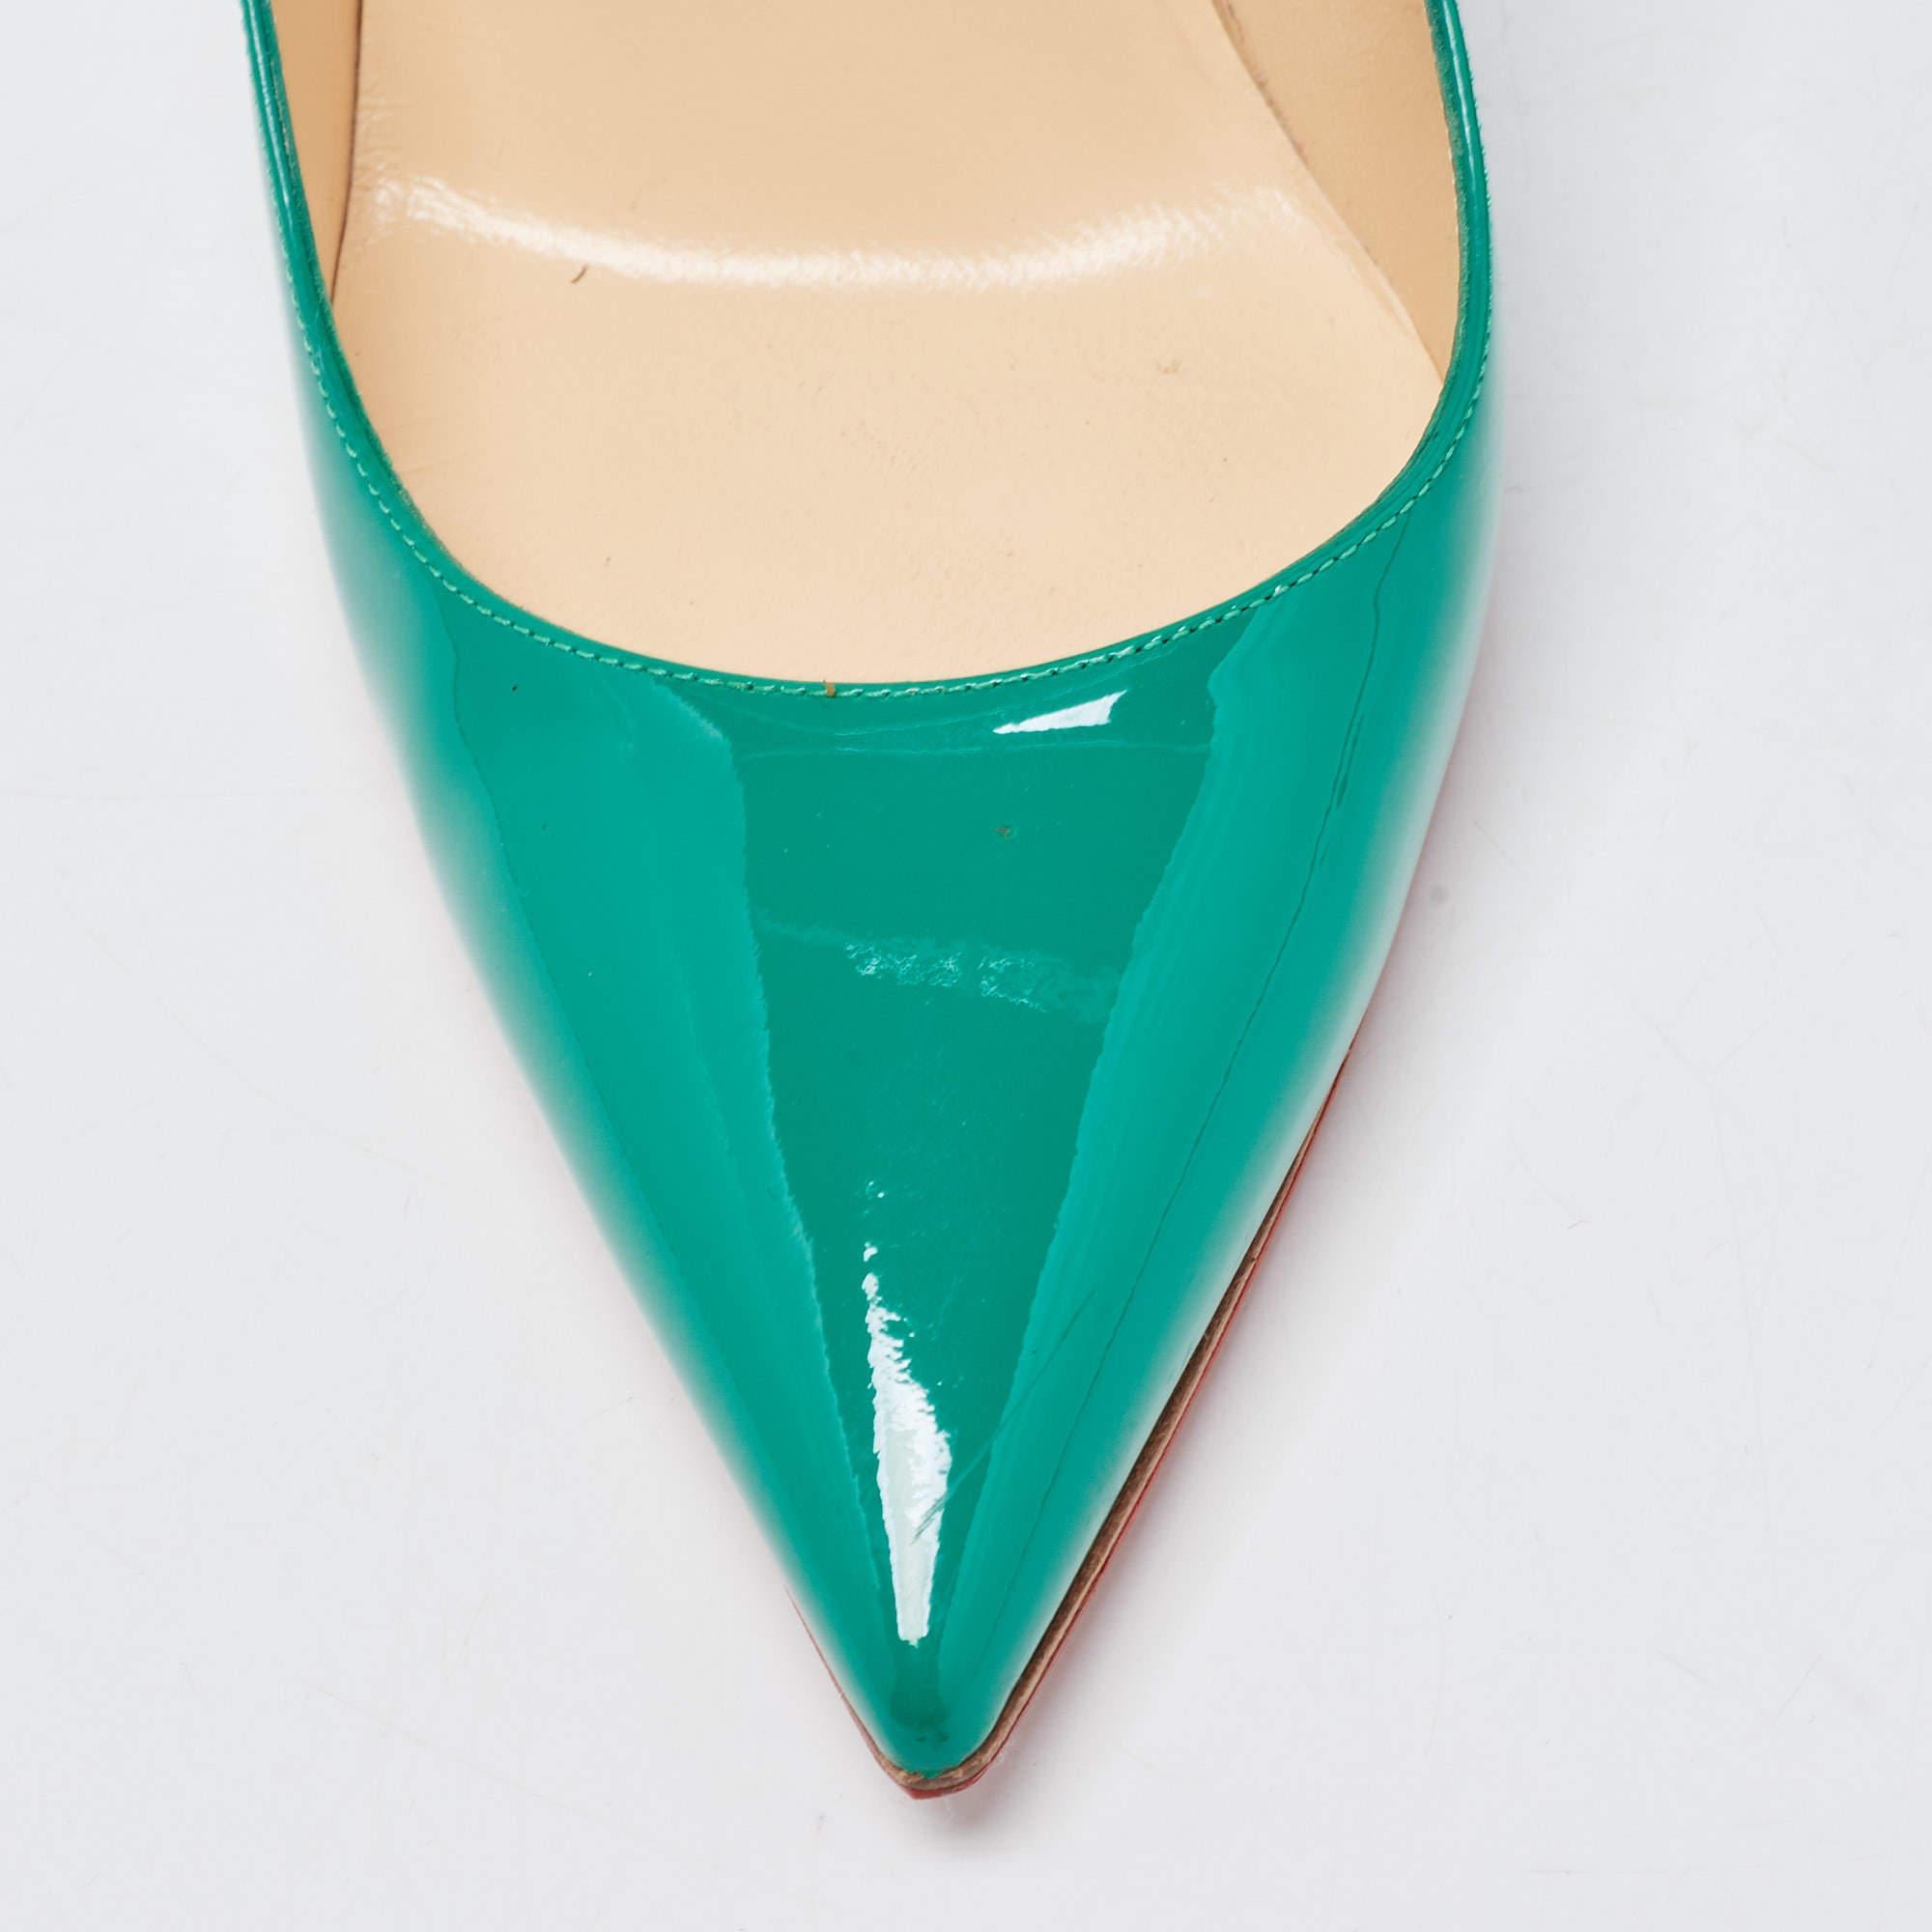 Christian Louboutin Green Patent Leather So Kate Pointed Toe Pumps Size 40 4